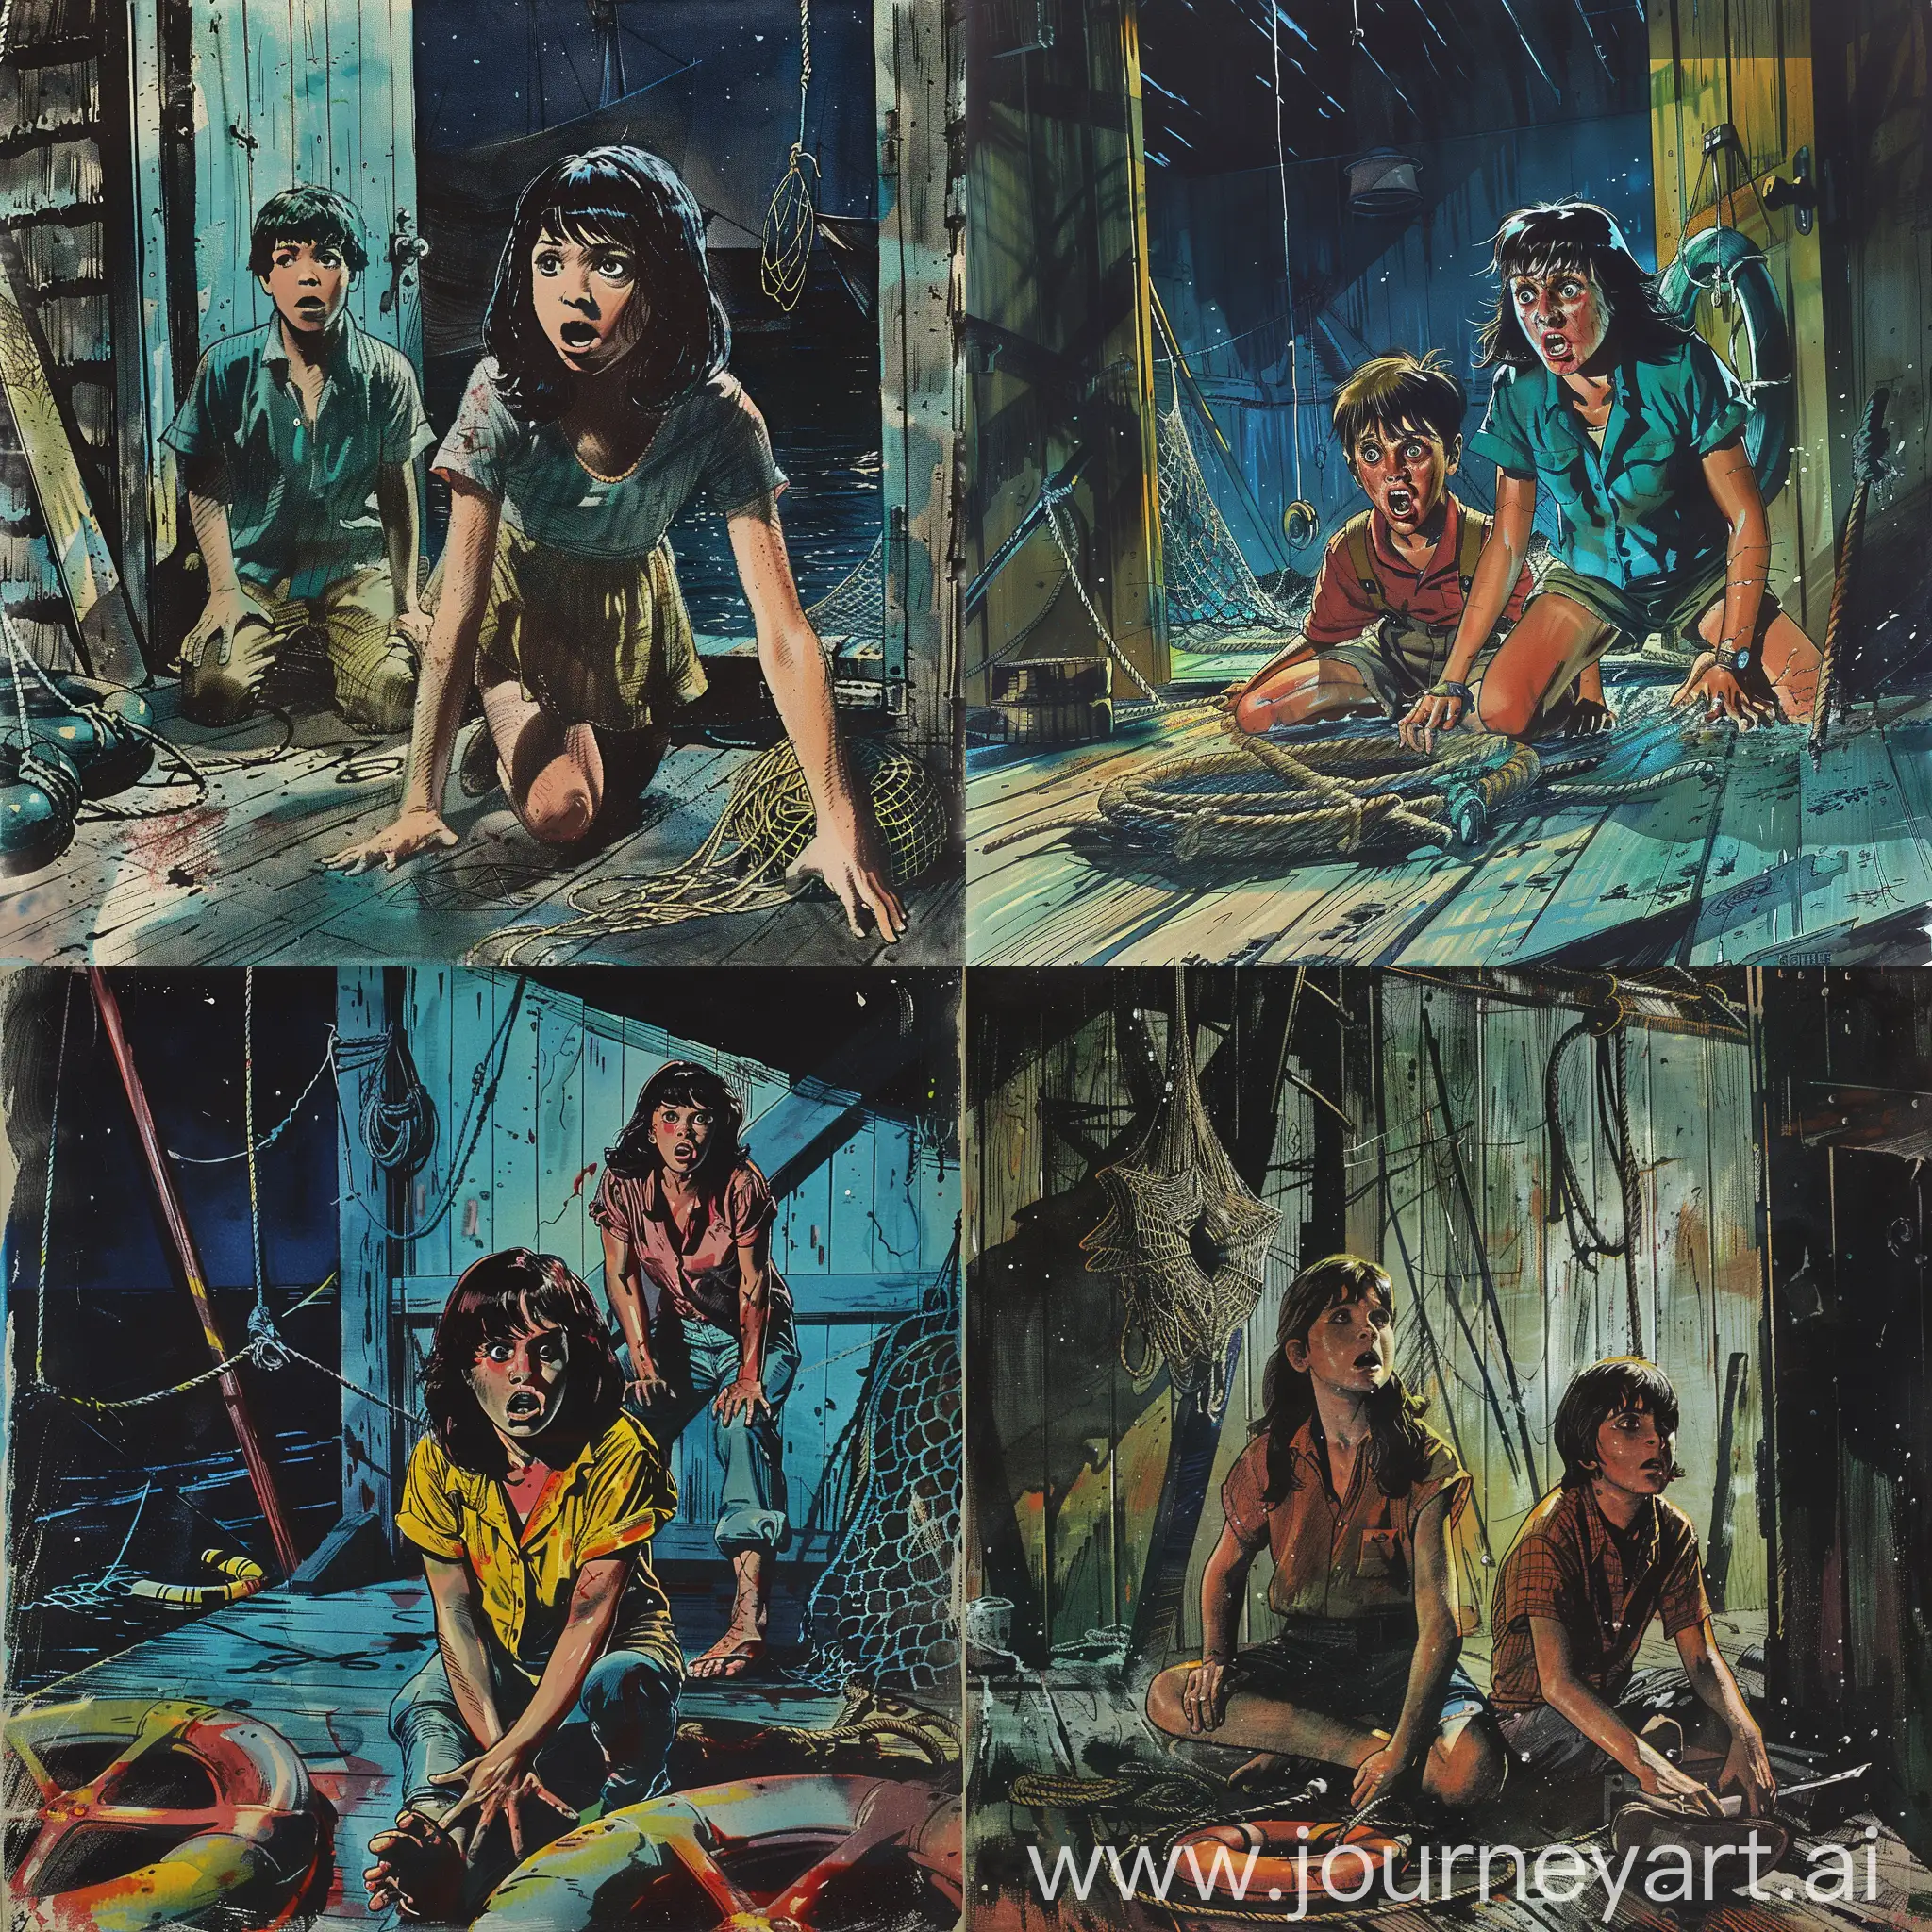 1970s-Horror-Comic-Style-Fishing-Cabin-Pentagram-Discovery